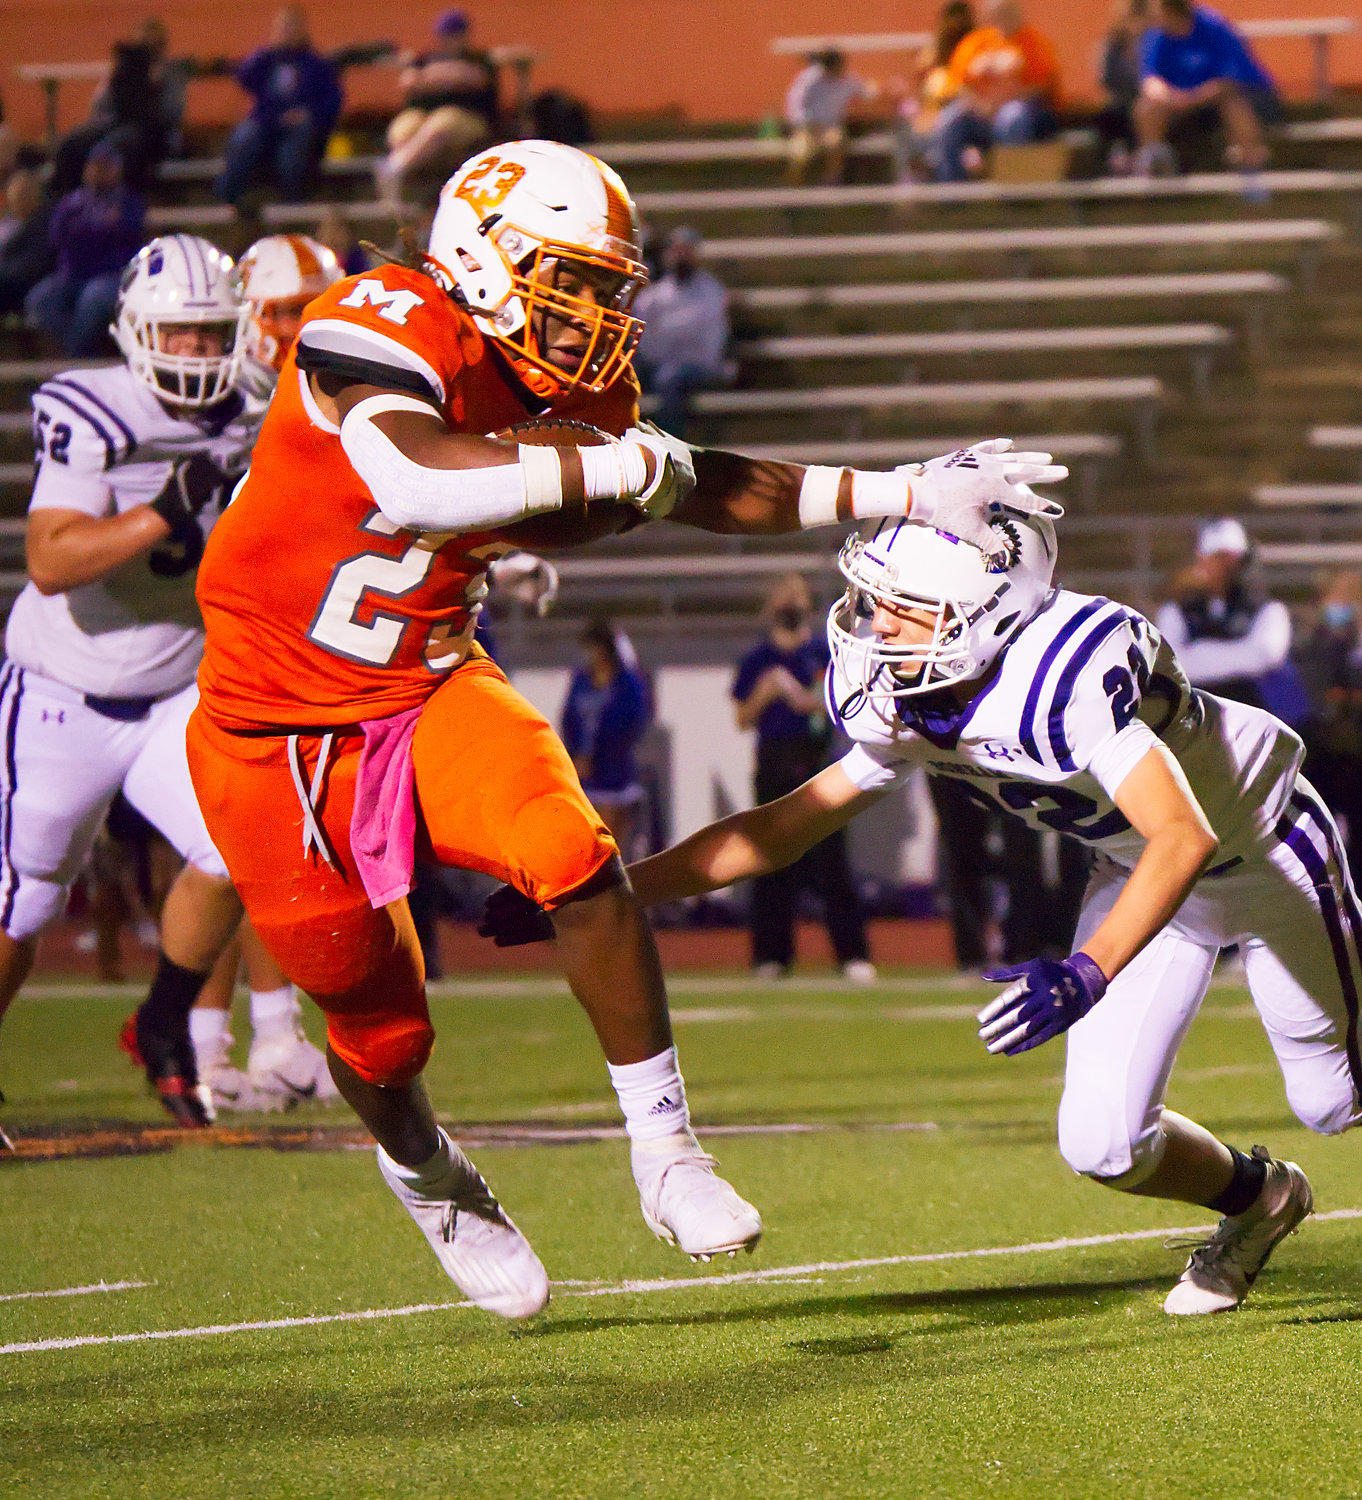 Trevion Sneed of Mineola avoids a would-be tackler in the game against Bonham. (Monitor photo by Sam Major)